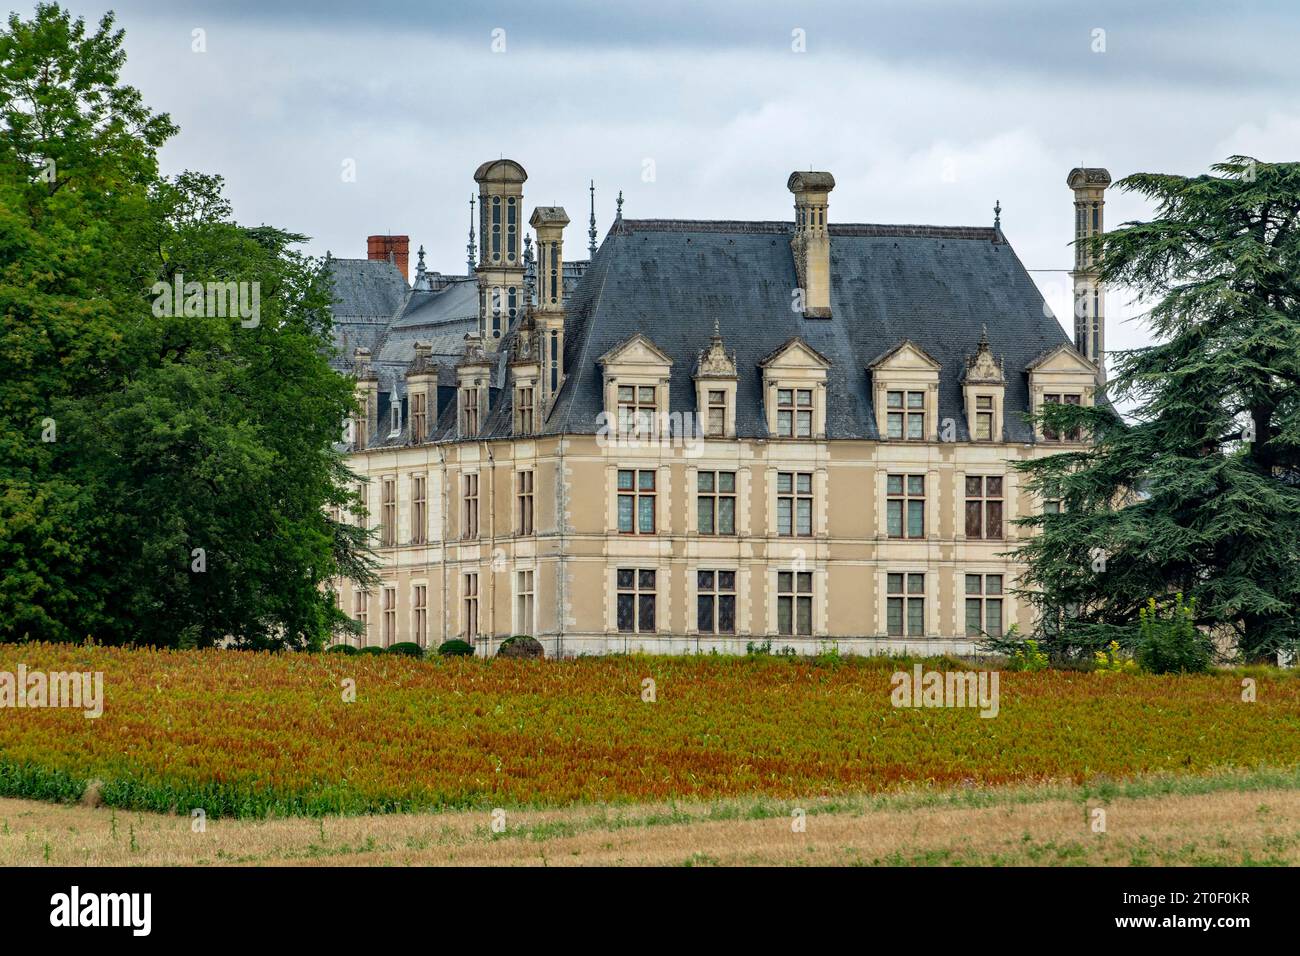 Beauregard Castle stands in the Beuvron Valley on the territory of the French commune of Cellettes about six kilometers southeast of Blois.  The castle houses the Galerie des Illustres. It displays 327 portraits of important personalities from the history of France. Stock Photo